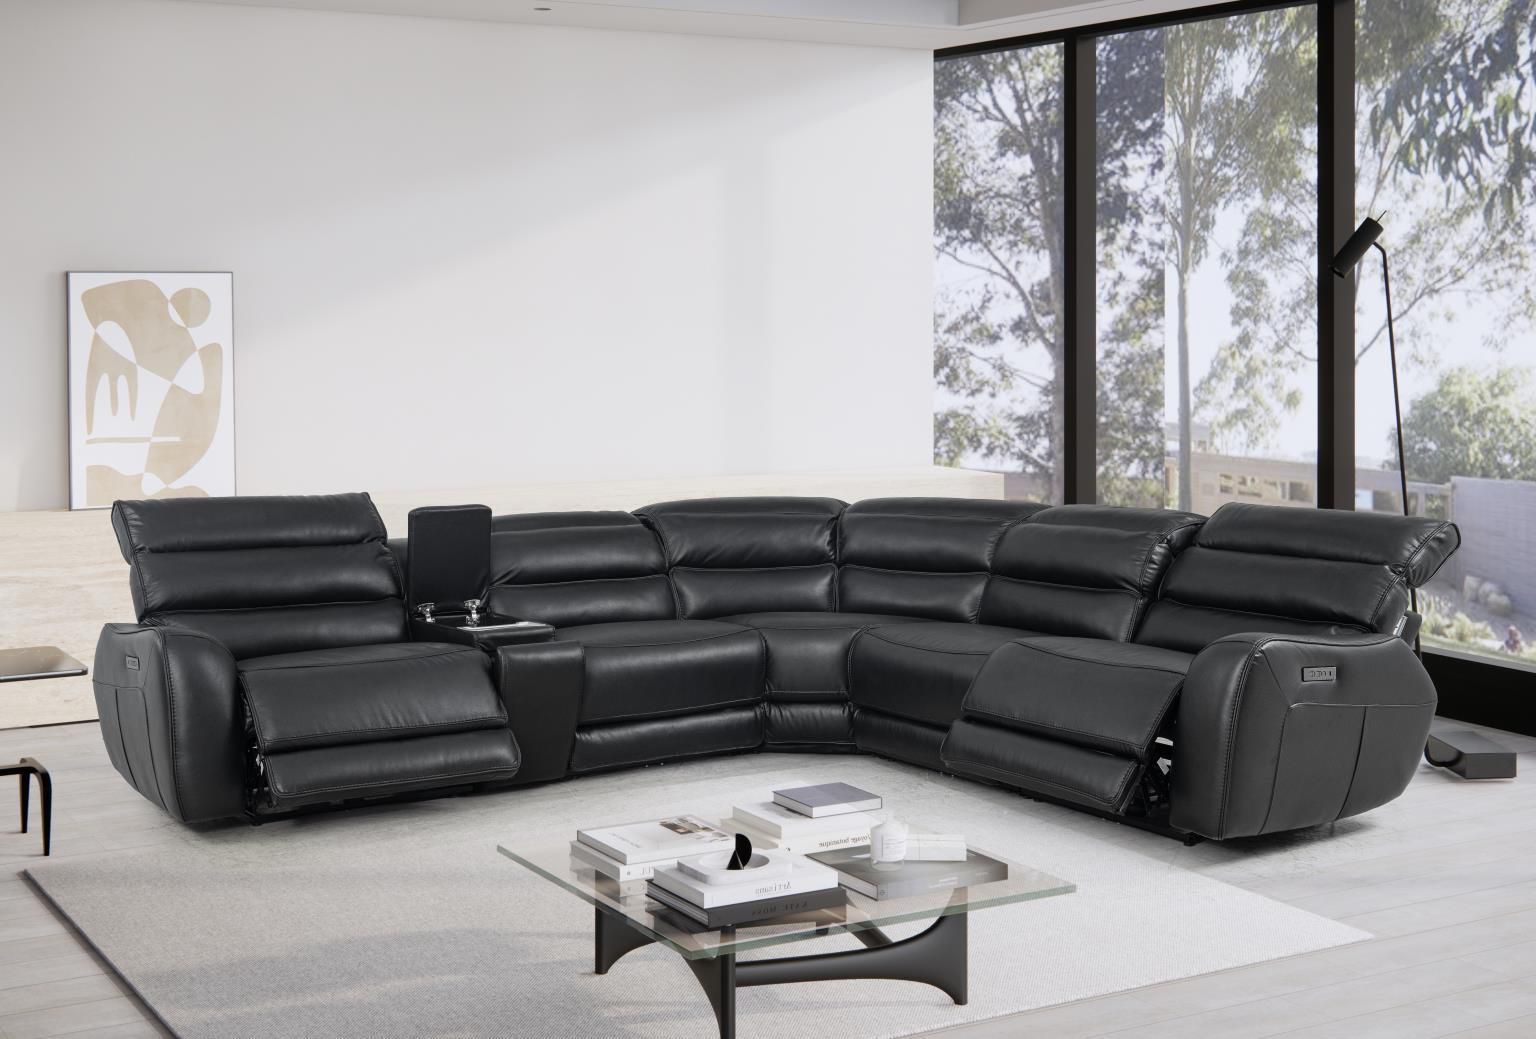 Power Reclining Sectional Sofa. $39 Down 